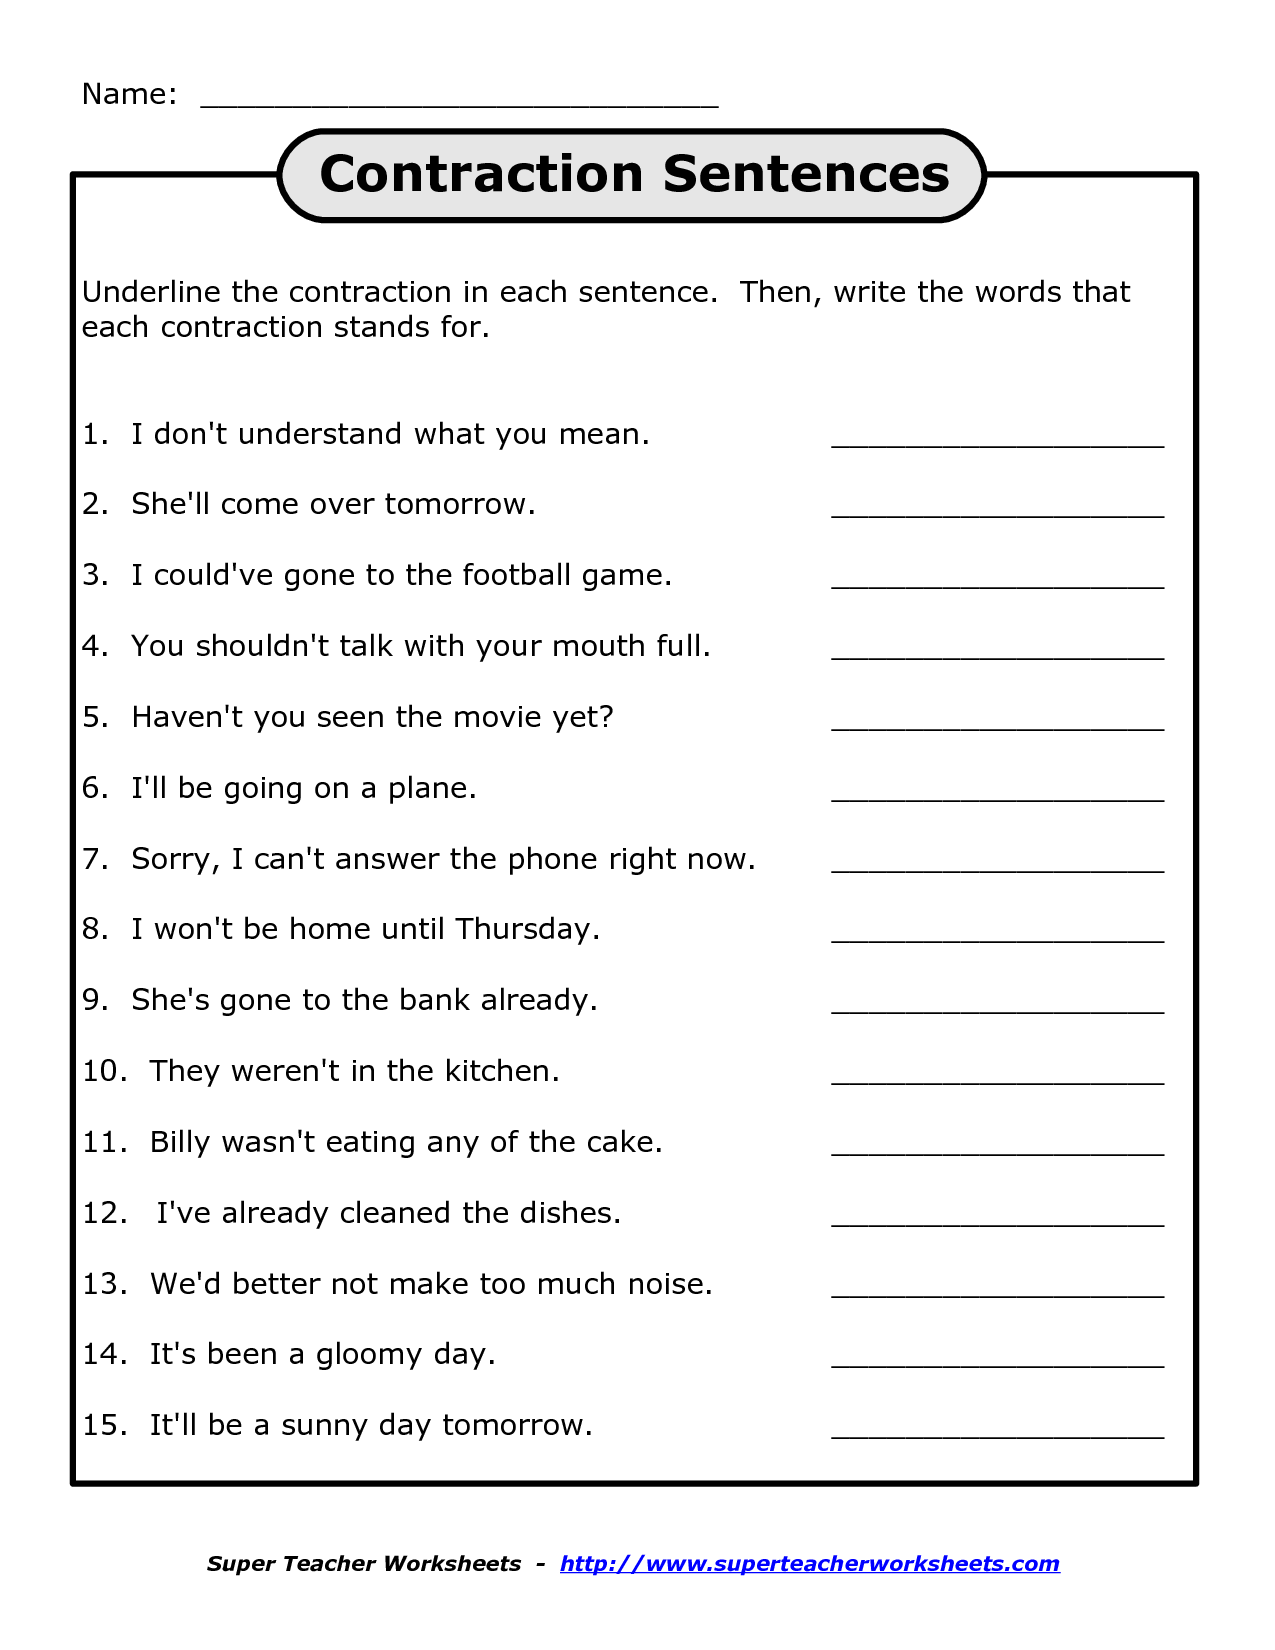 12-contractions-using-not-worksheets-worksheeto